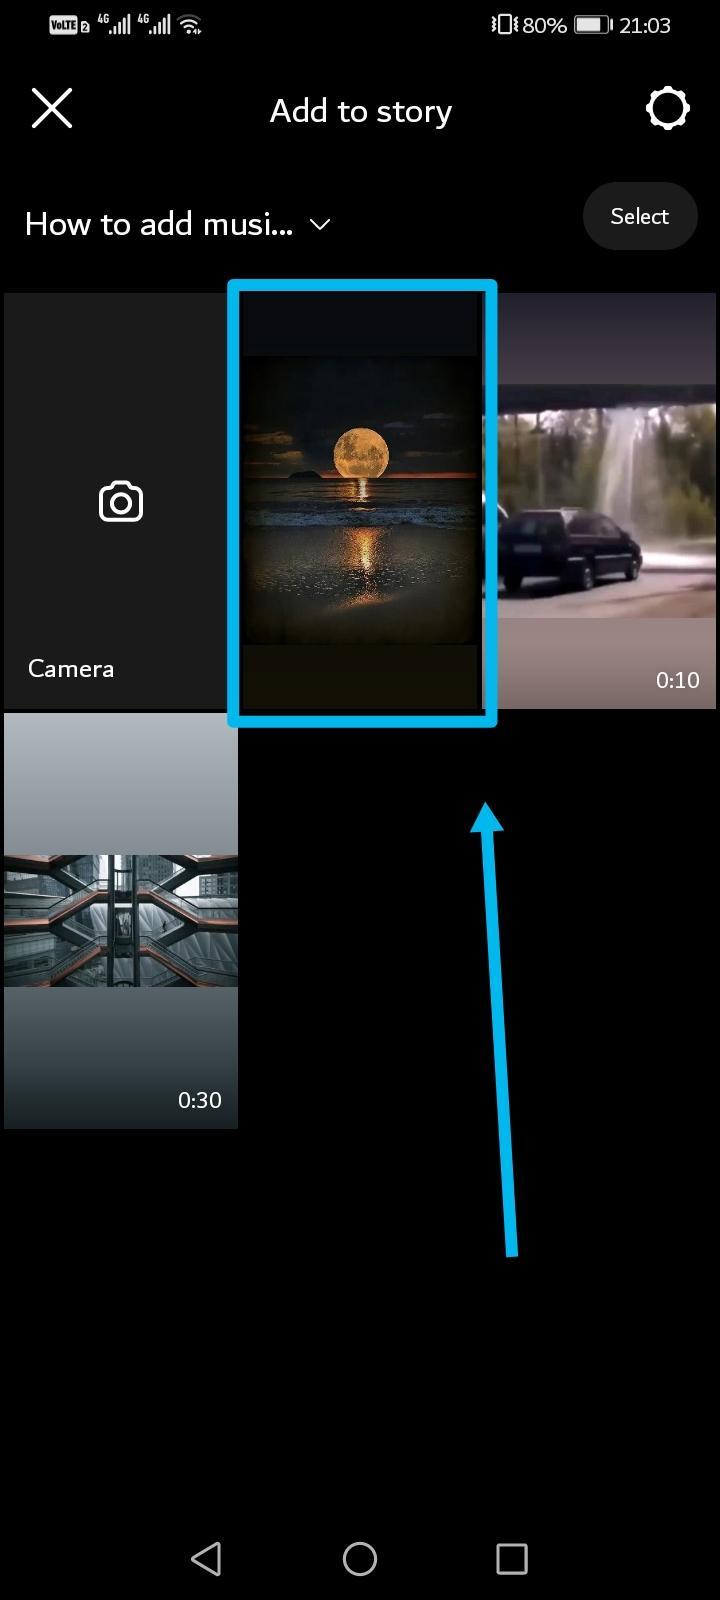 How to Share a YouTube Video on Instagram - choosing video on Instagram